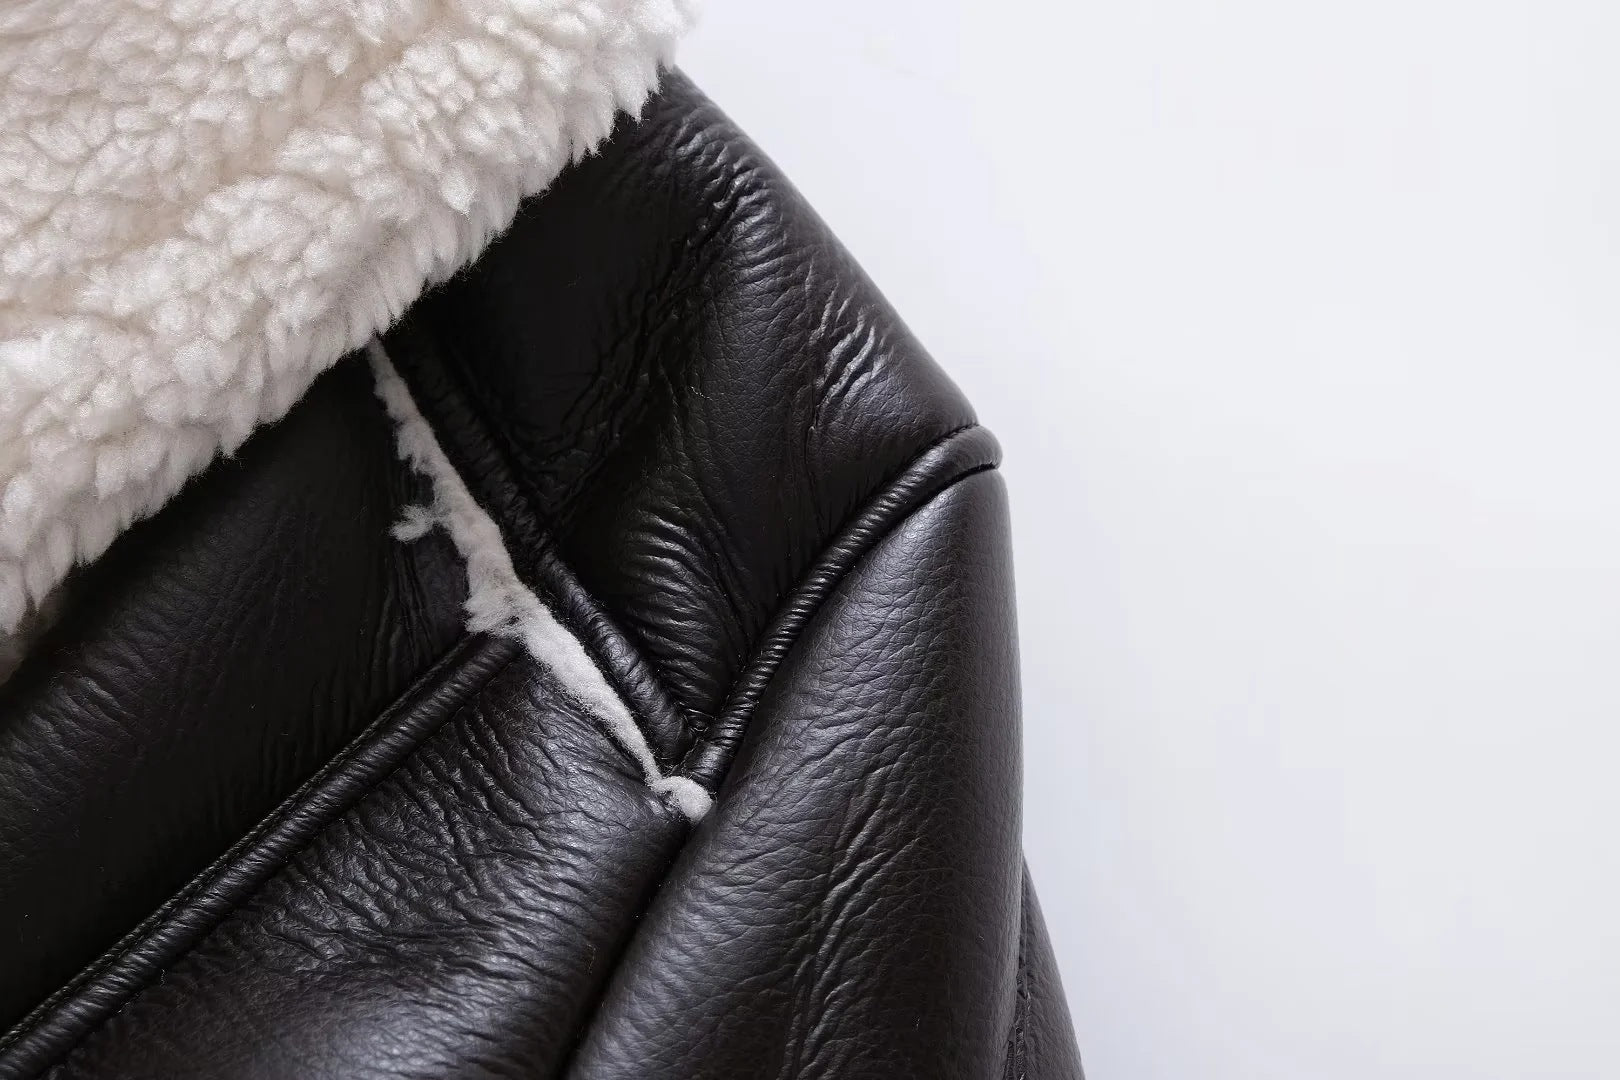 Fashion Designed Leather with Fur Short Motorcycle Coats Jacket-Coats & Jackets-The same as picture-XS-Free Shipping Leatheretro